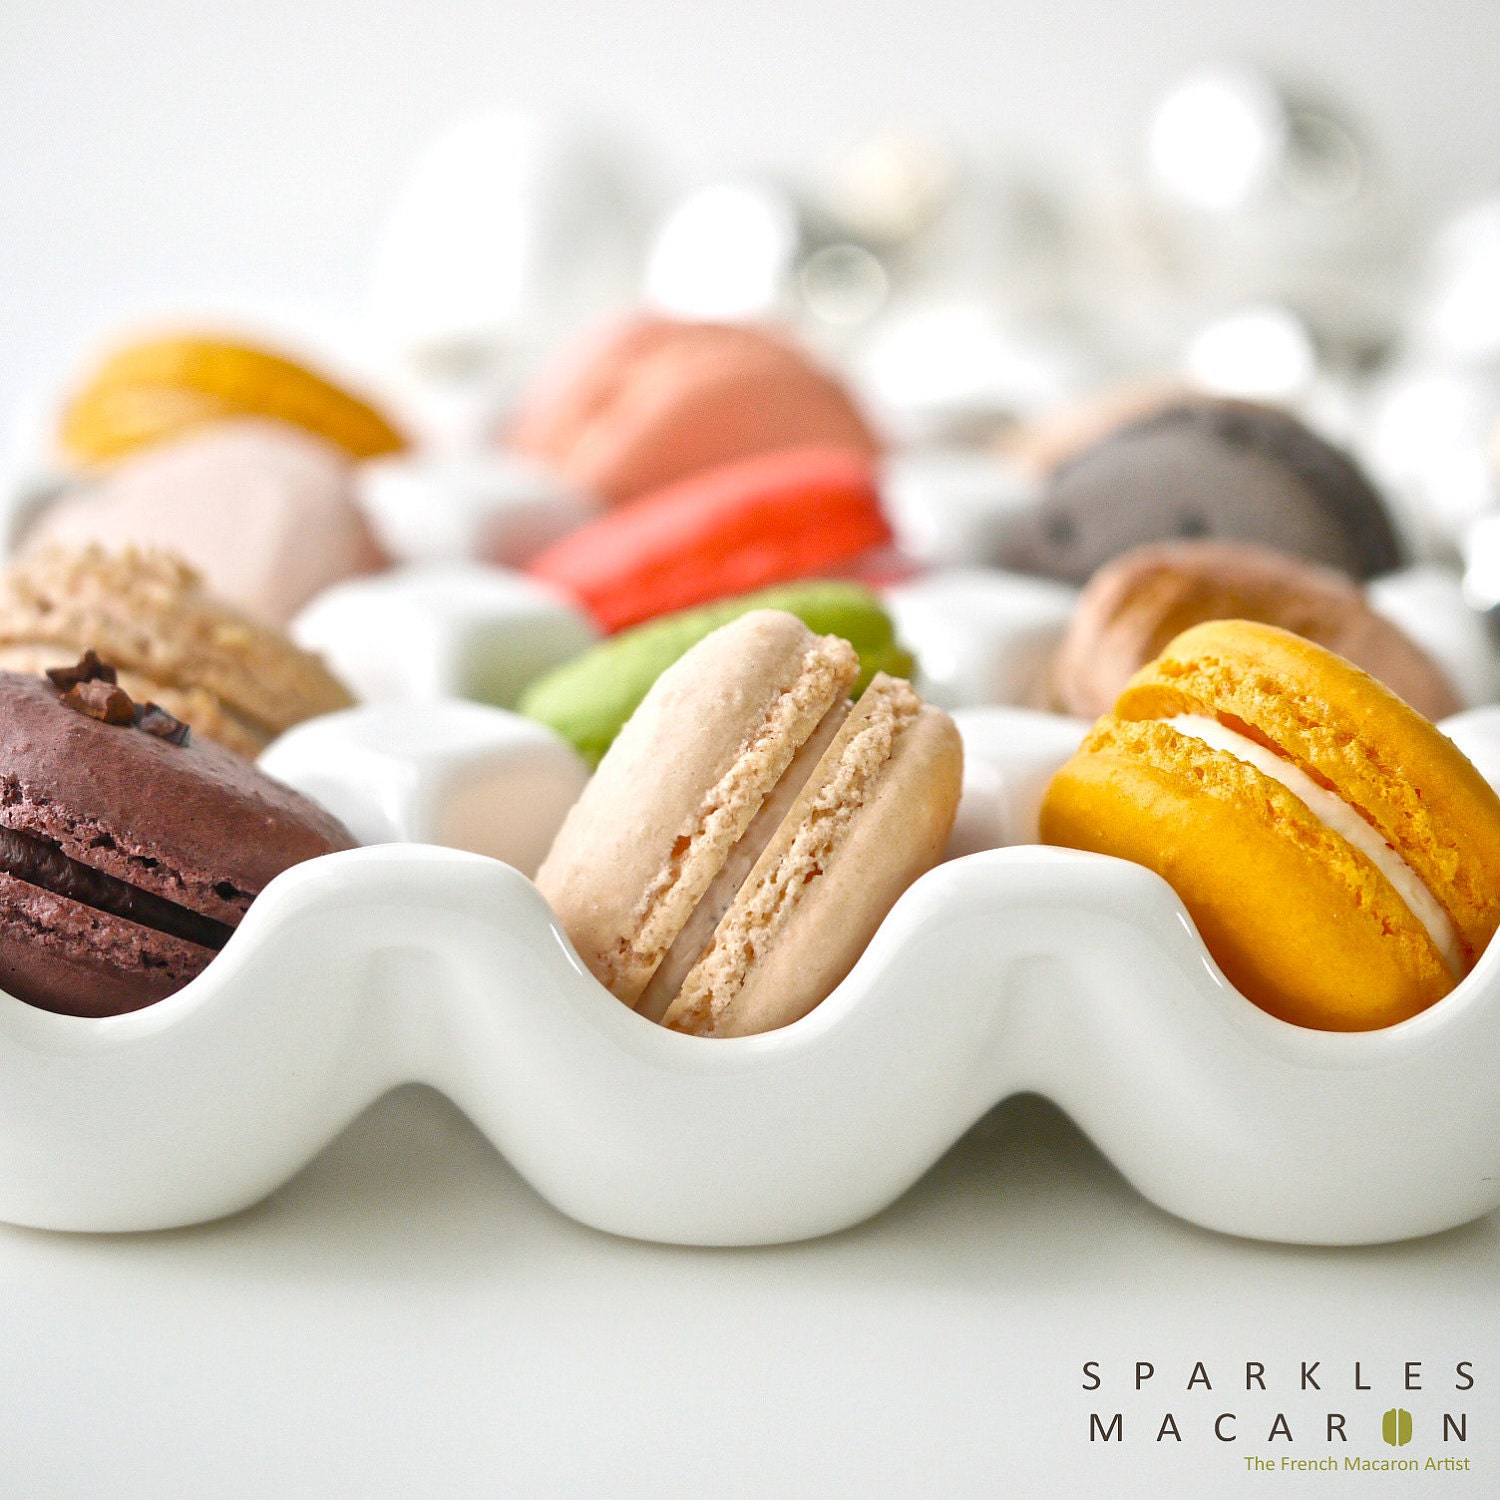 48 Assorted Regular French Macarons - Perfect for tea time